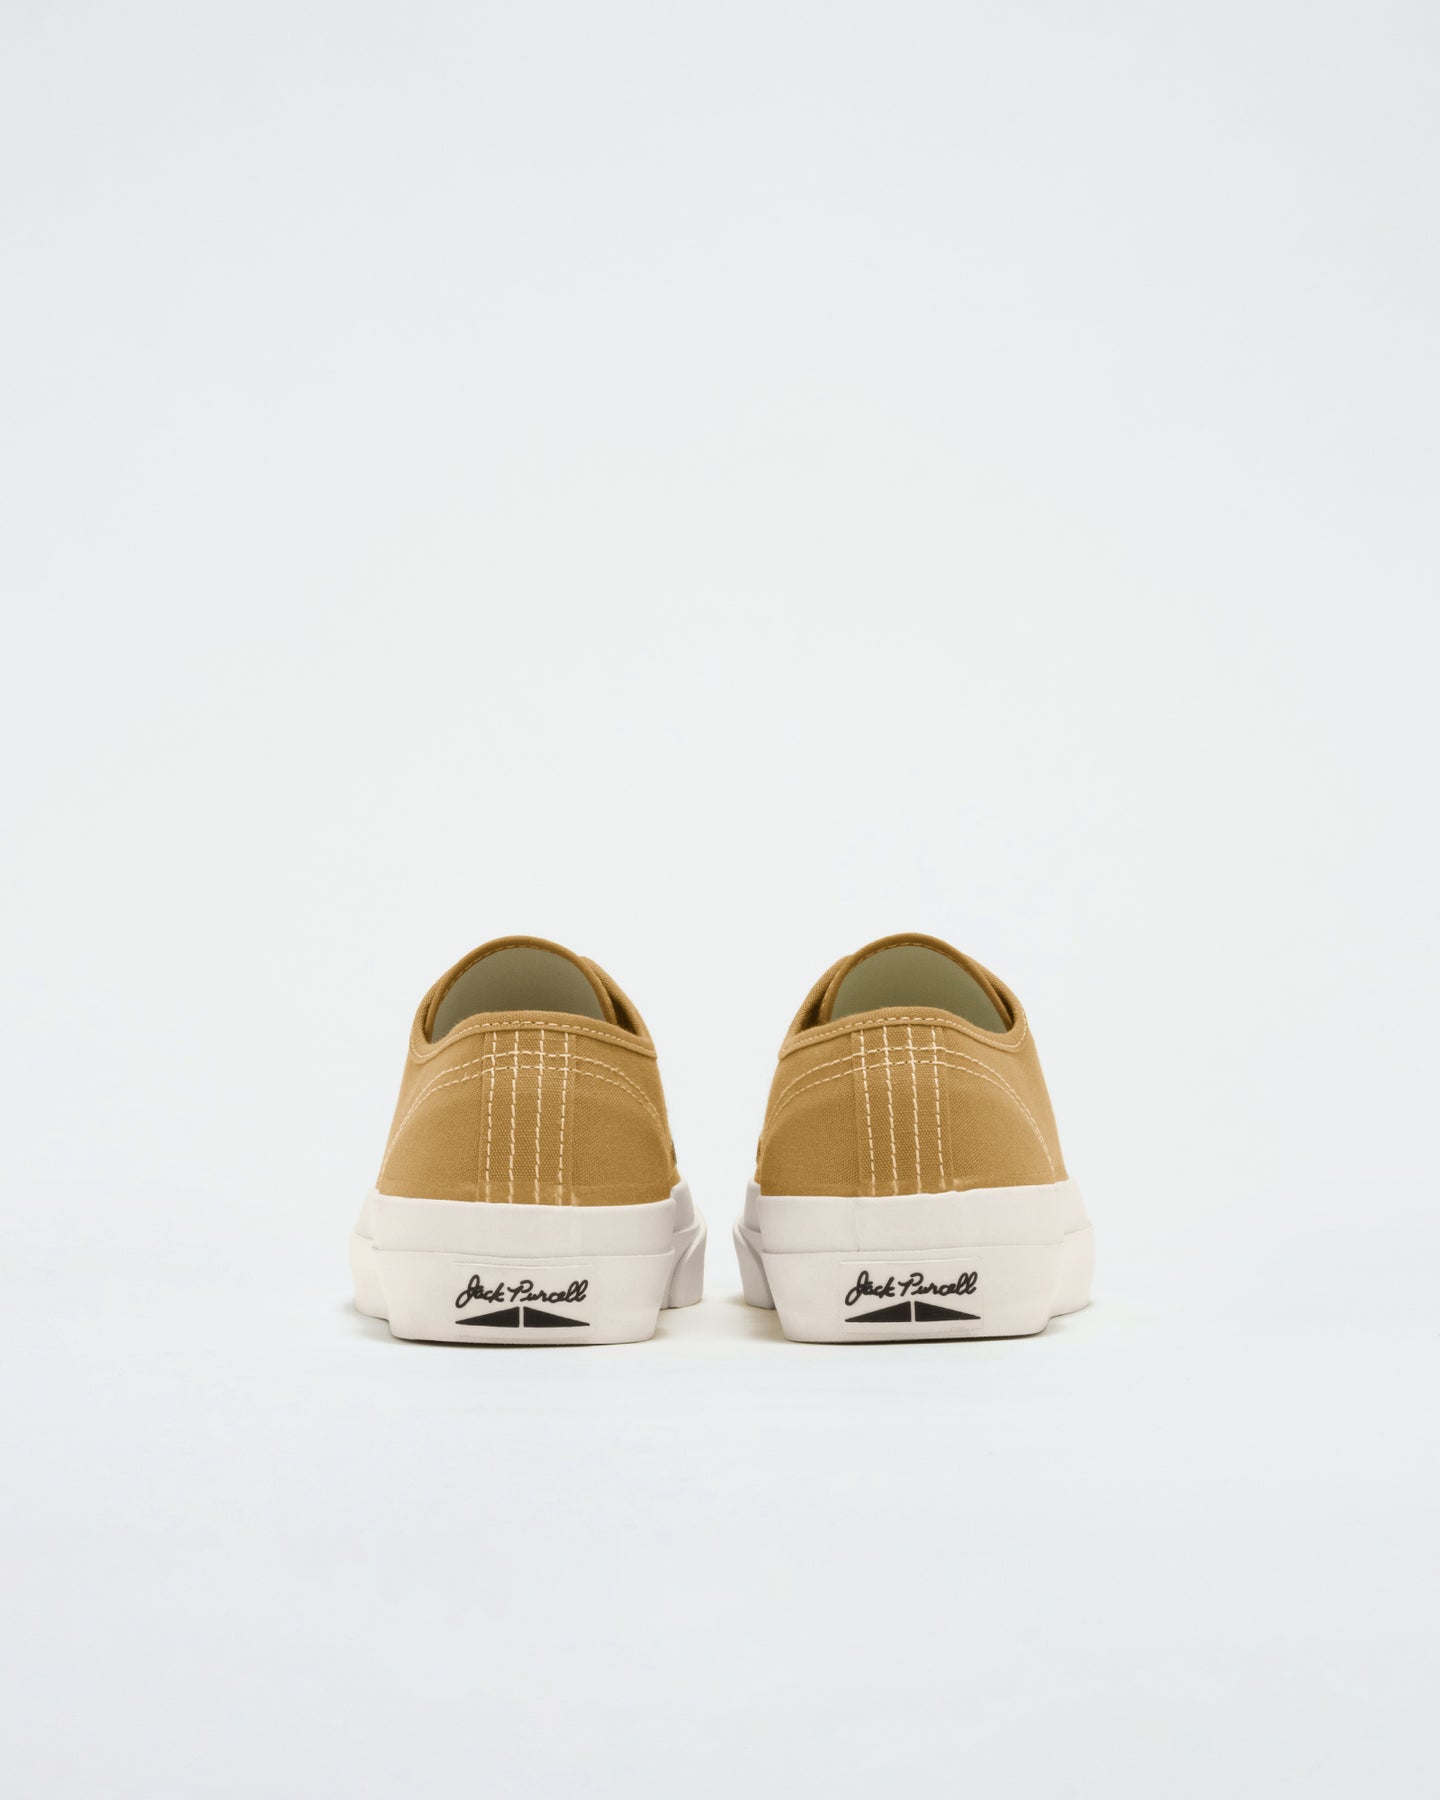 CONVERSE ADDICT JACK PURCELL CANVAS